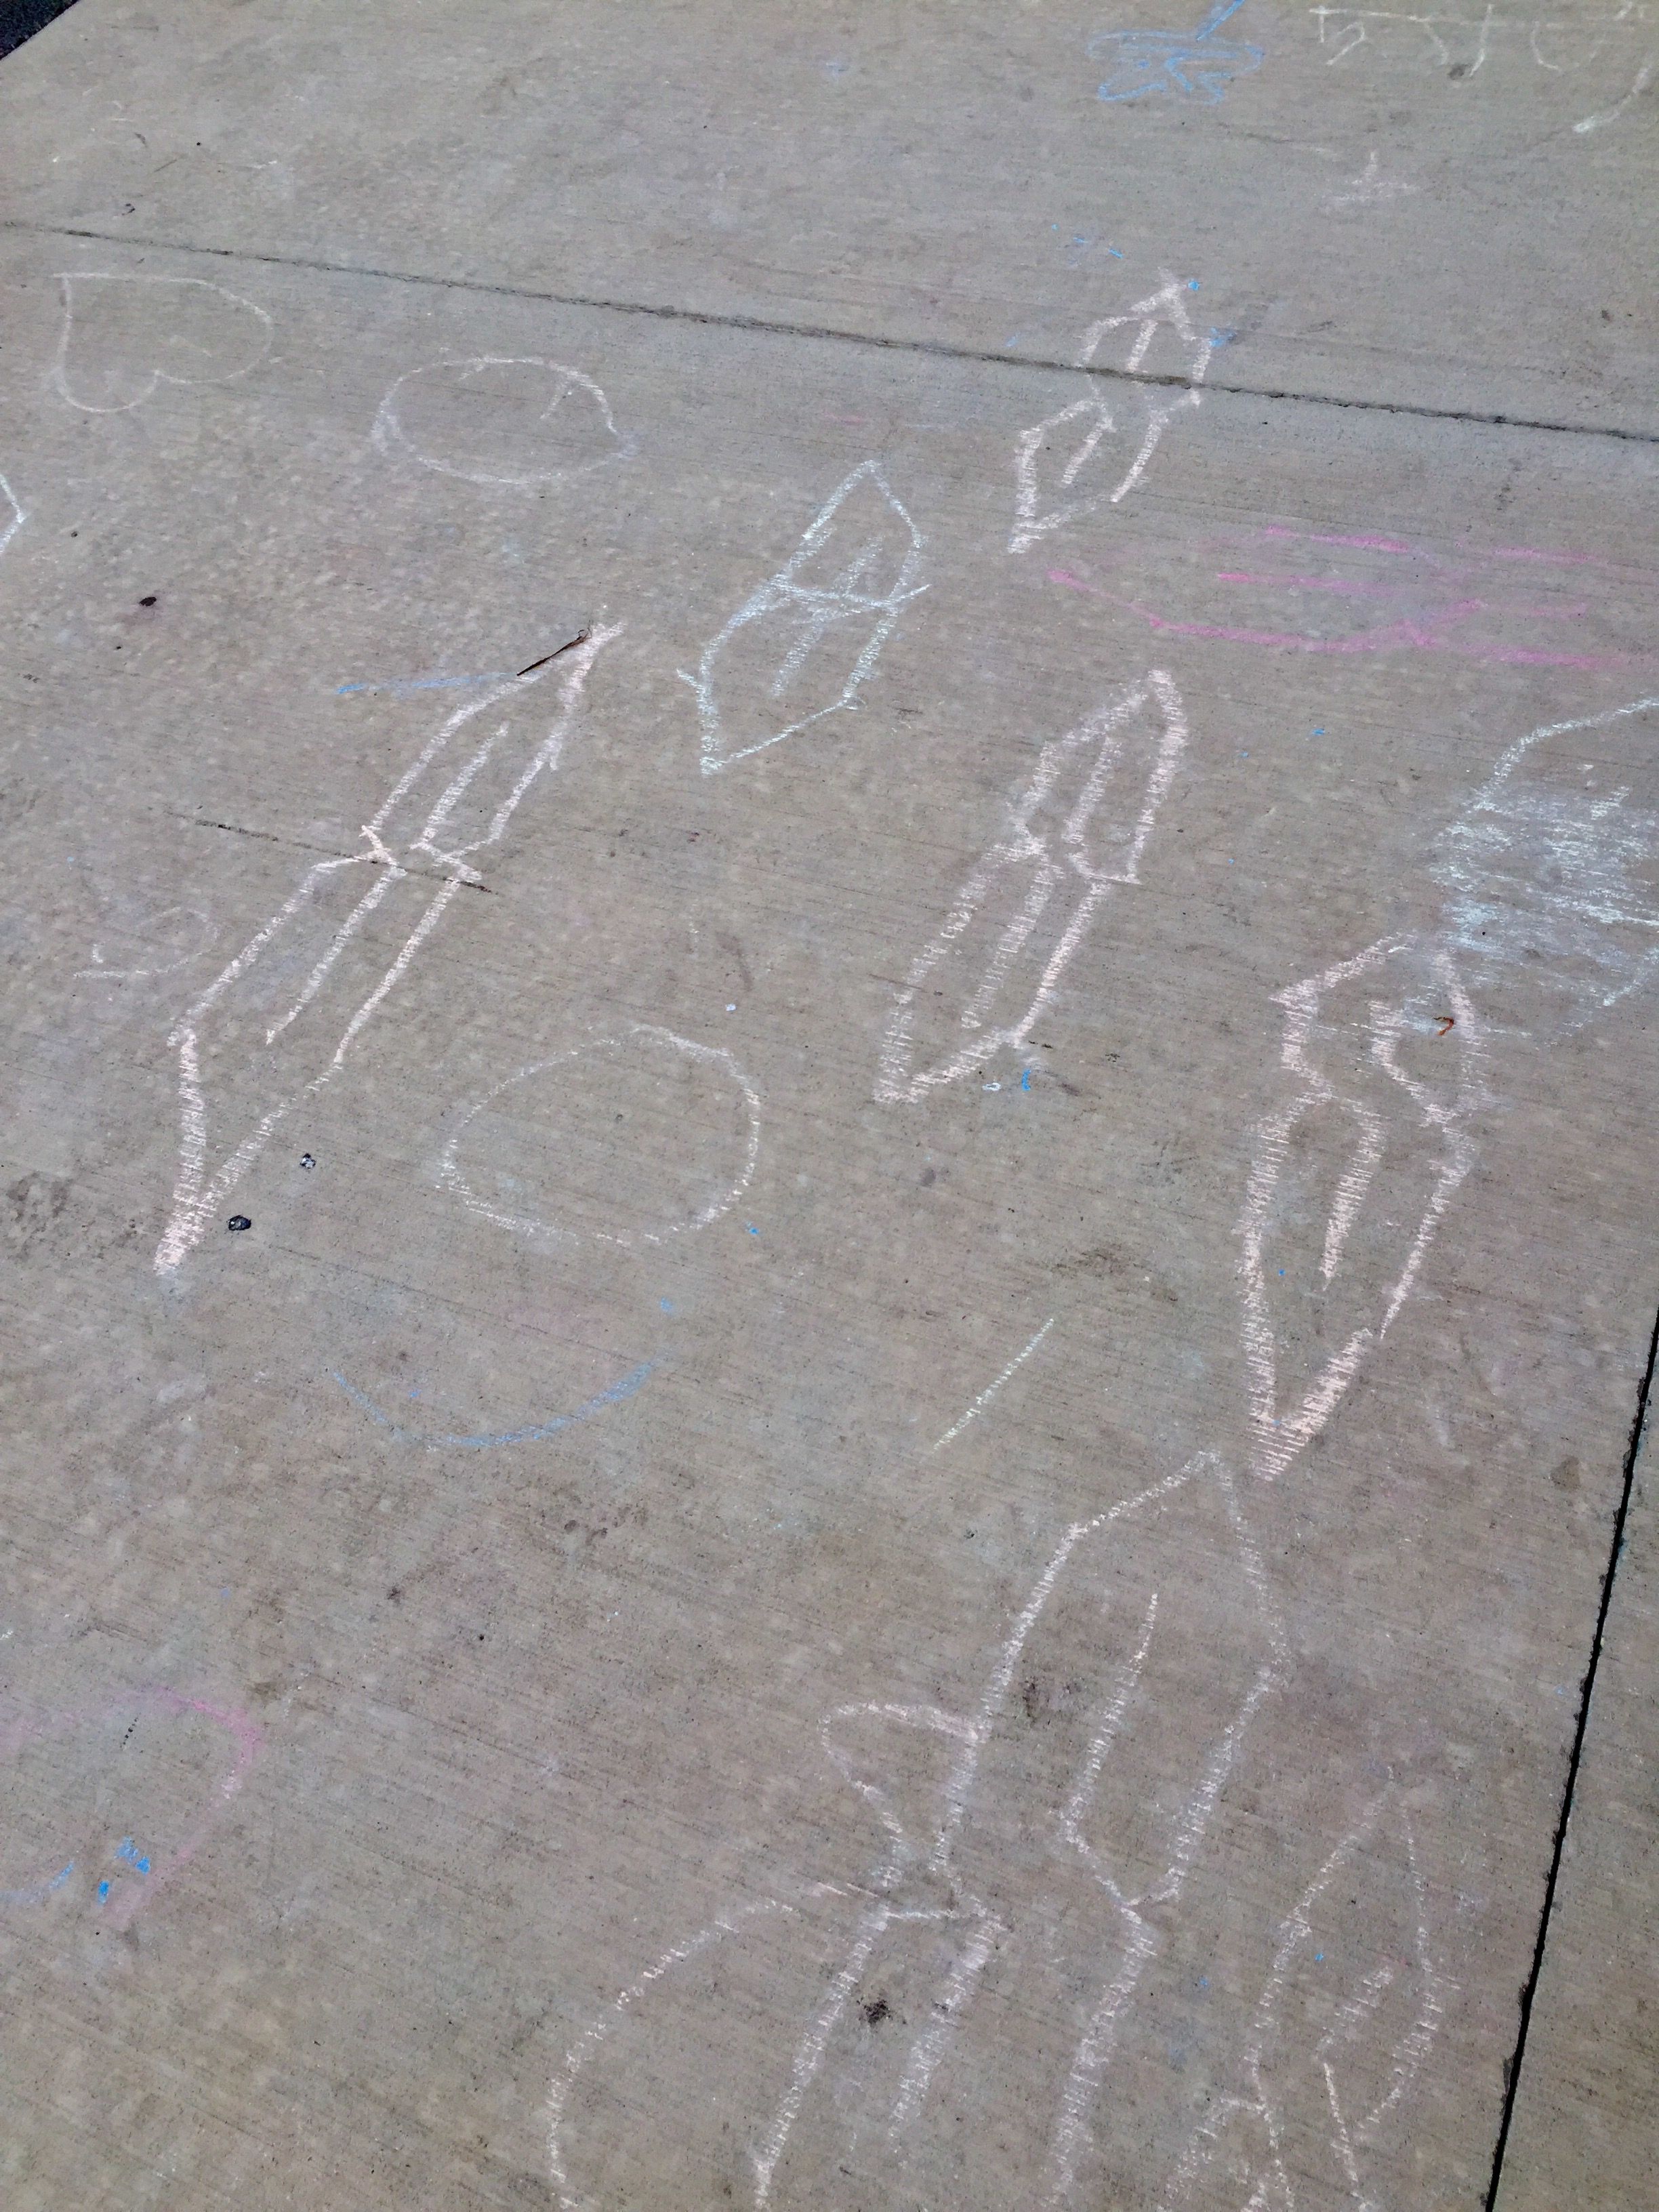 On an elementary school sidewalk, mysterious symbols from ancient times have appeared.